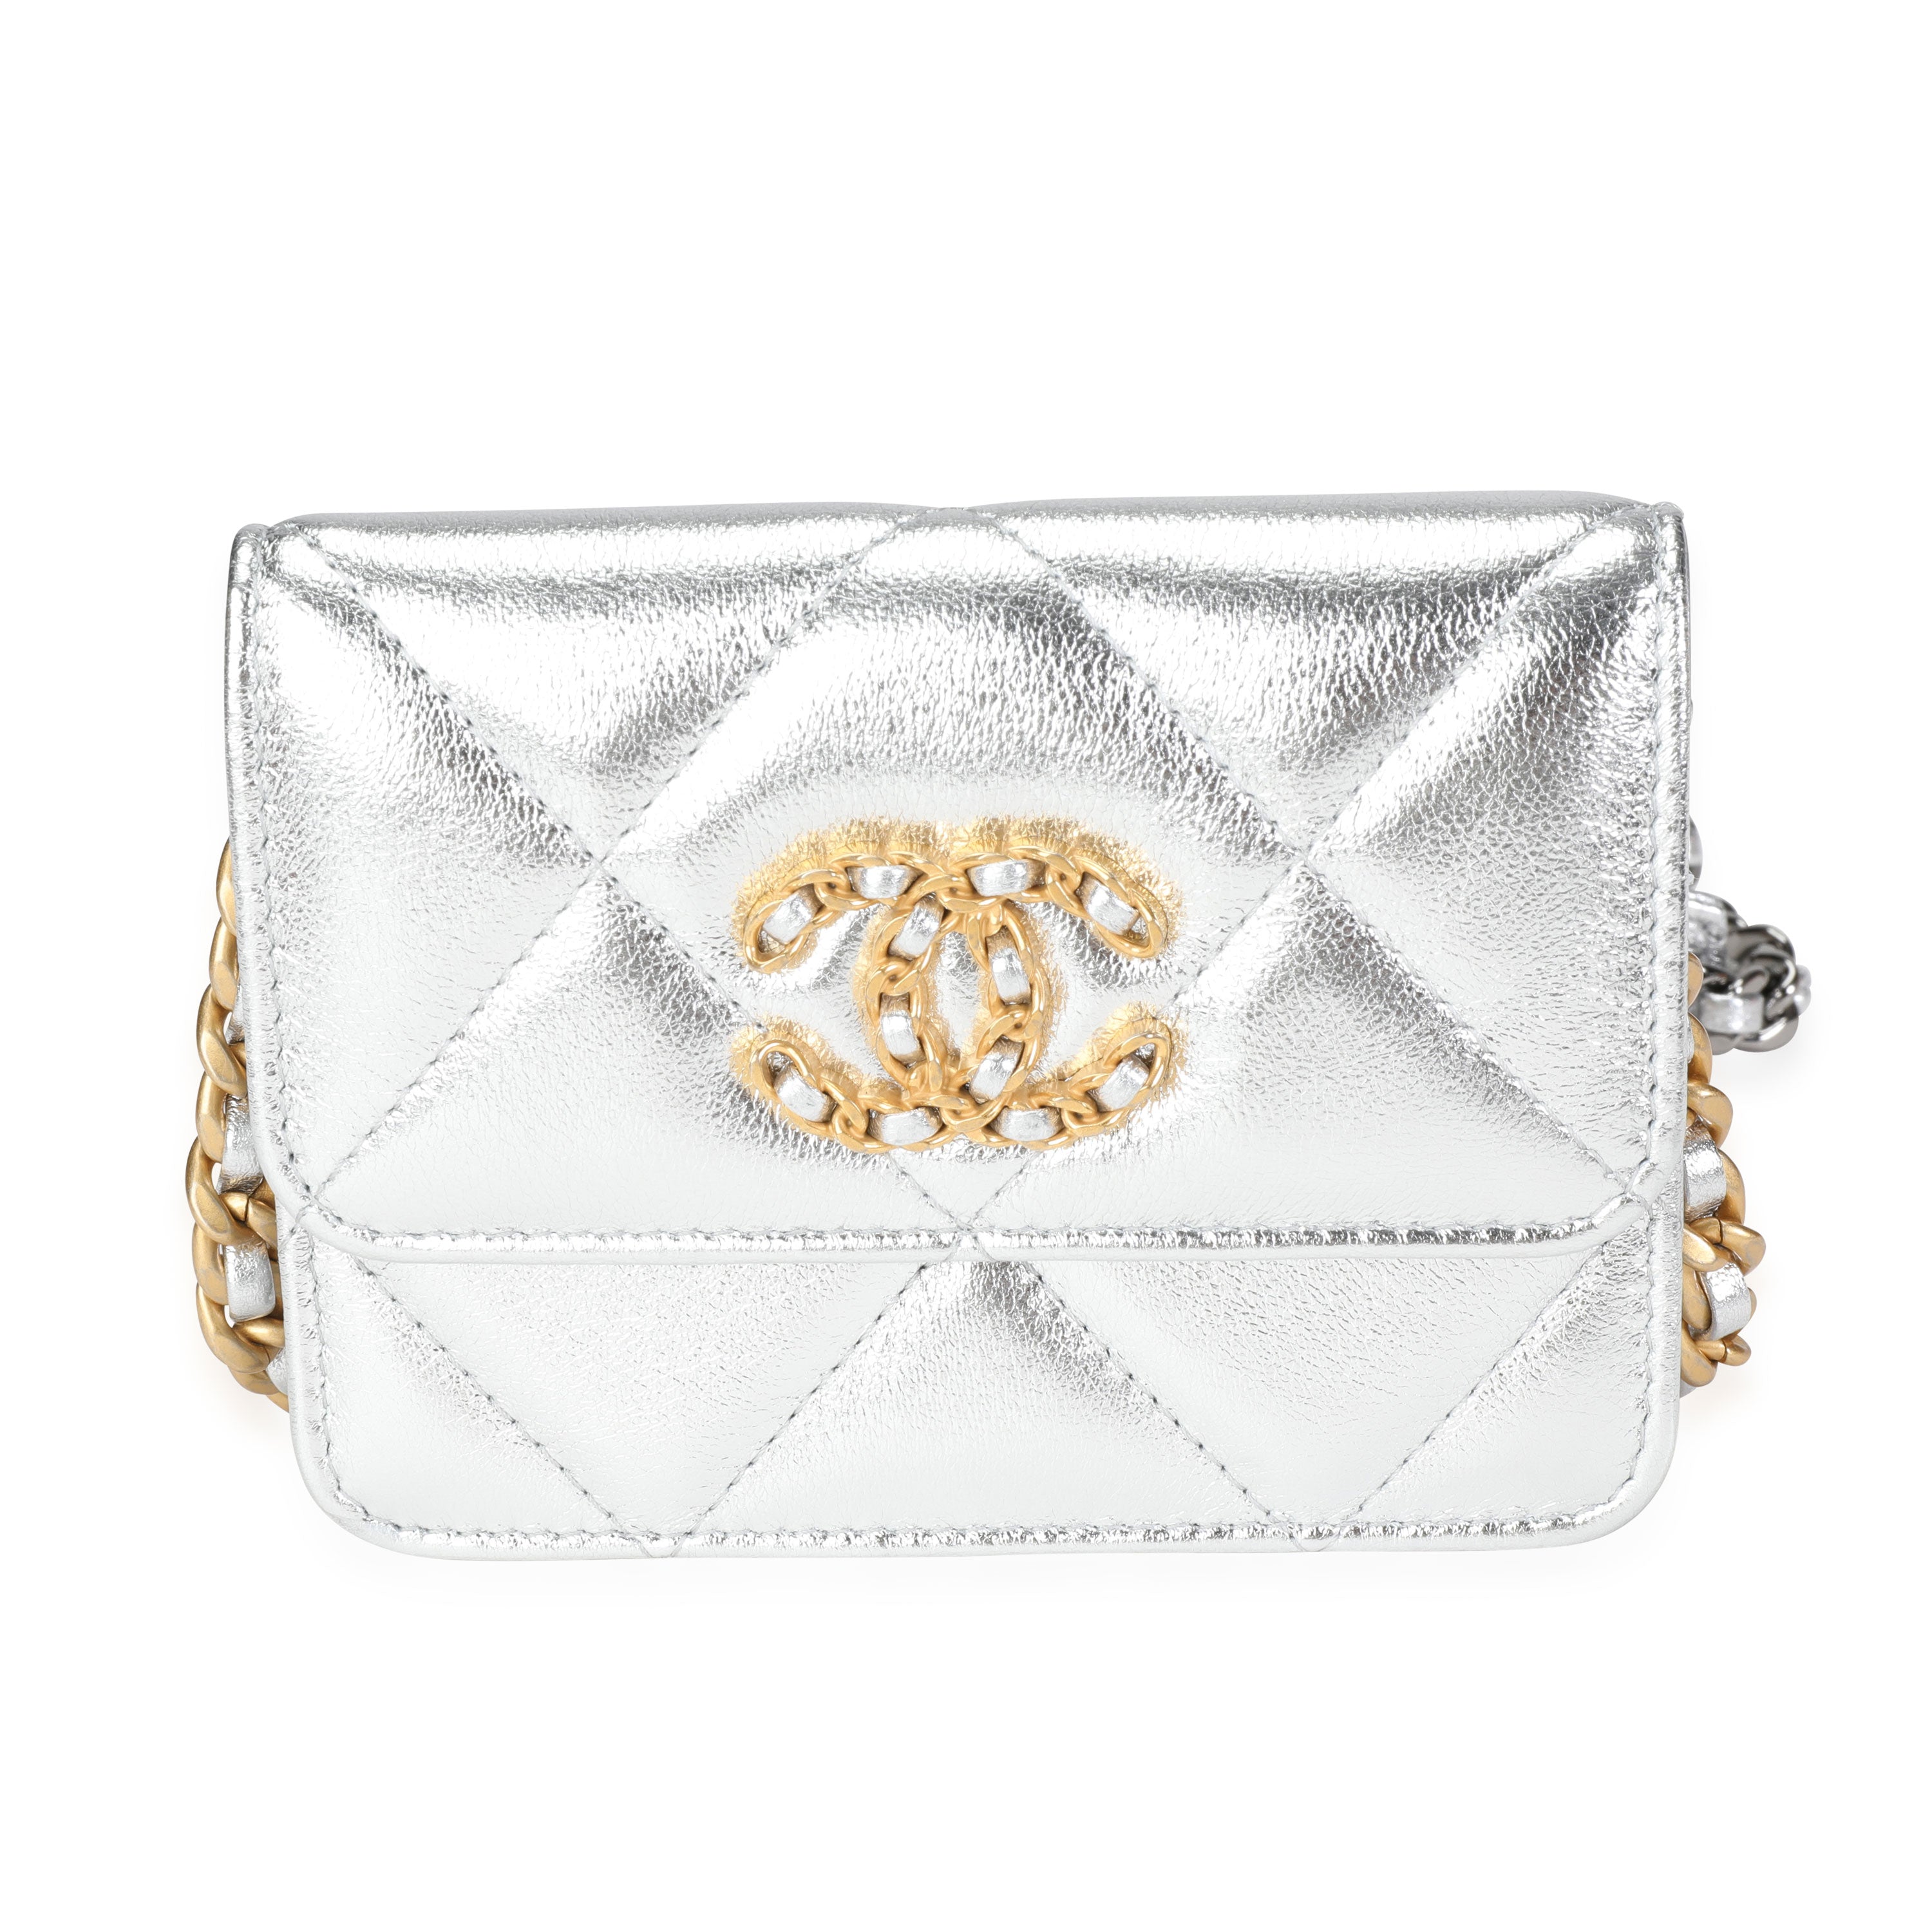 Chanel Silver Quilted Lambskin Chanel 19 Mini Flap Bag, myGemma, HK